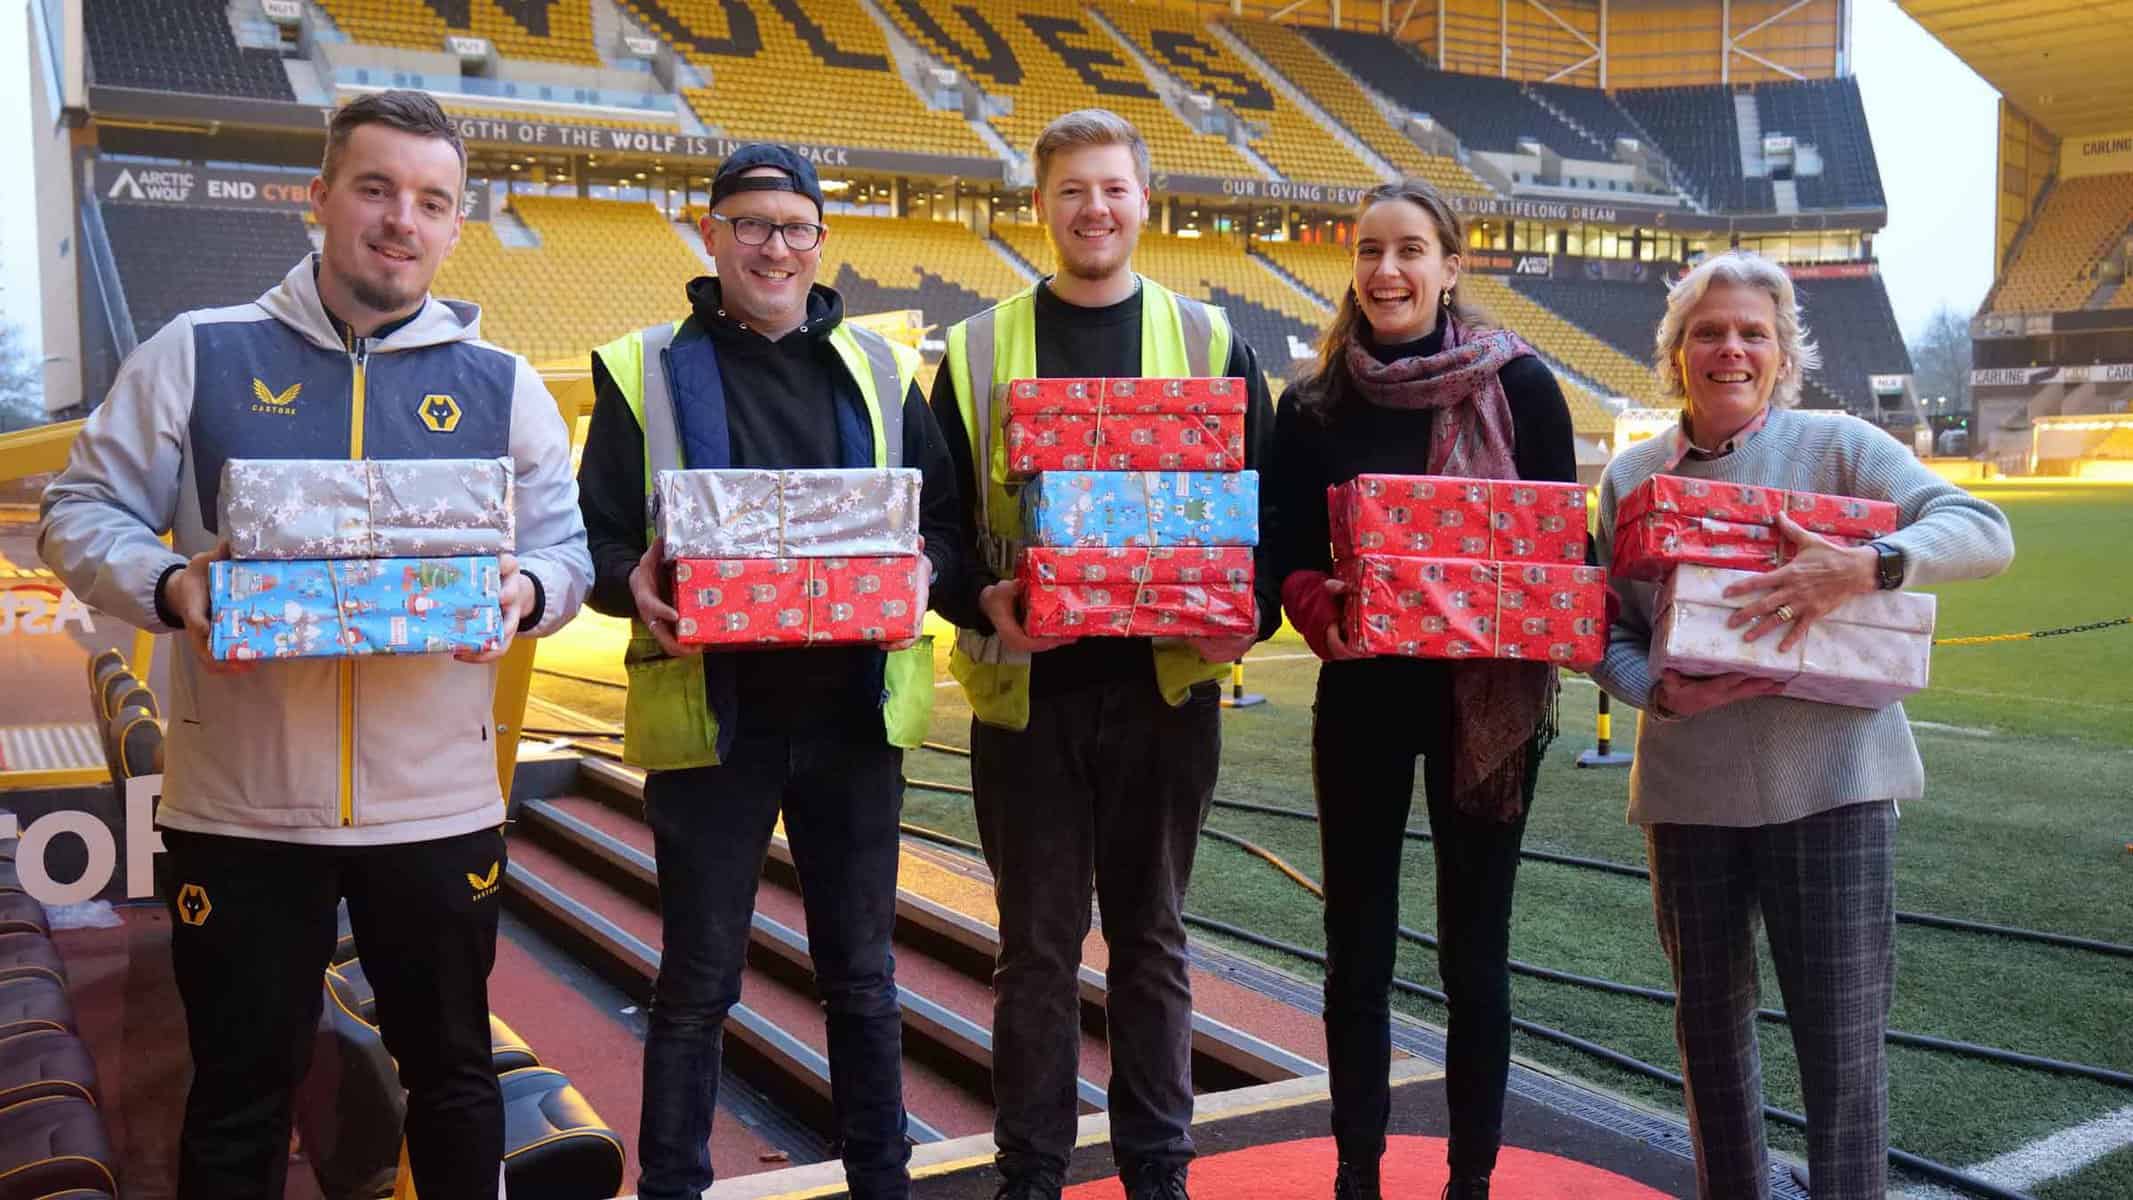 Shoebox Appeal helping out the community Image